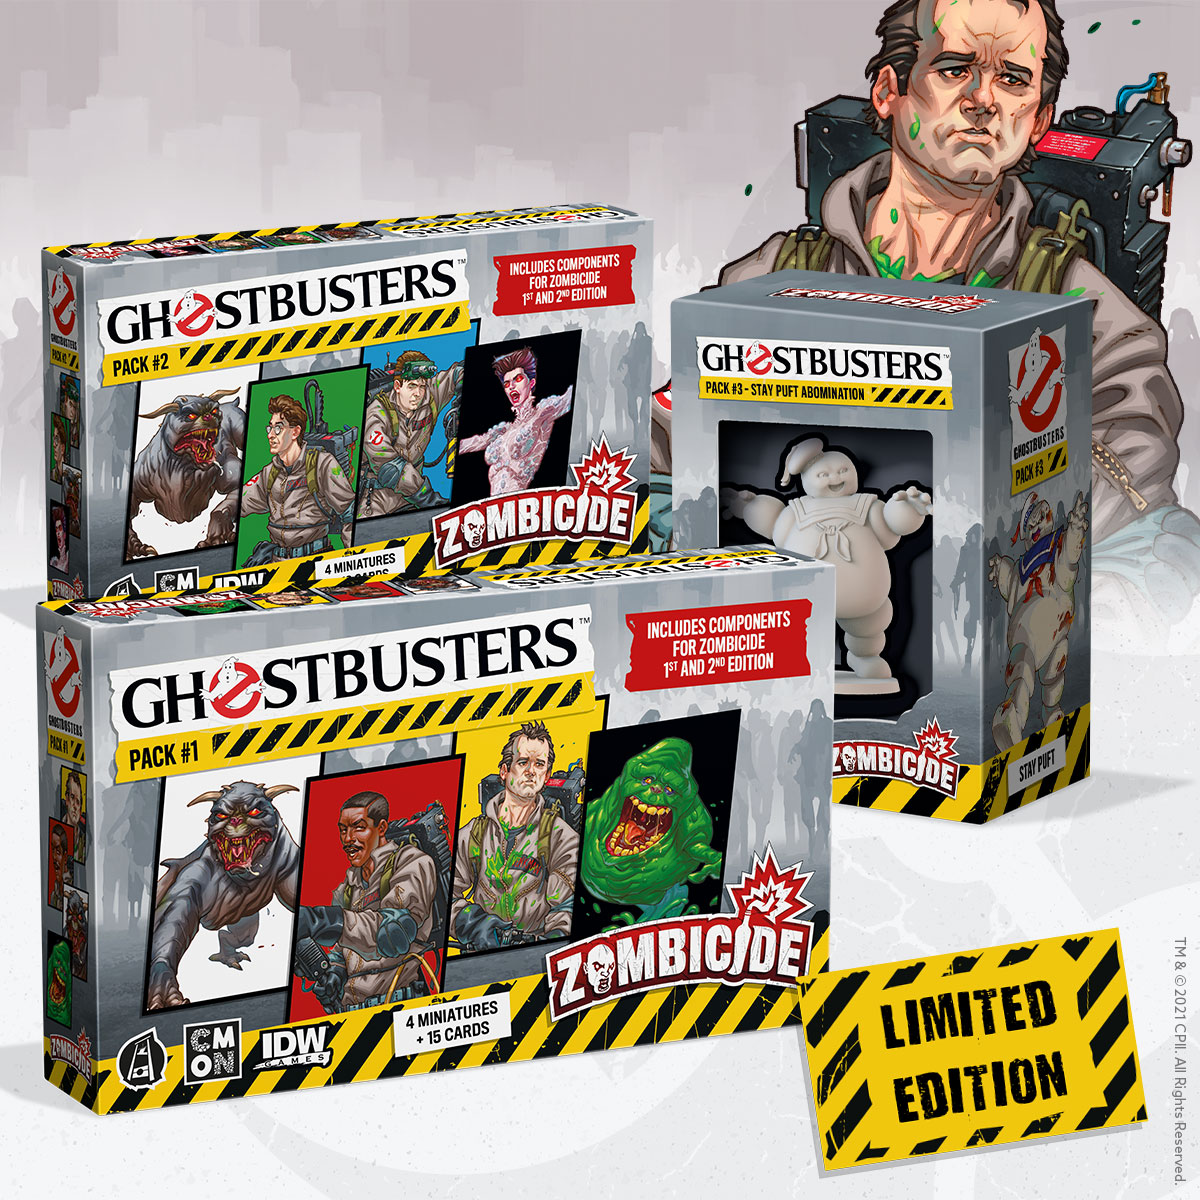 Ghostbusters-x-Zombicide-image-one